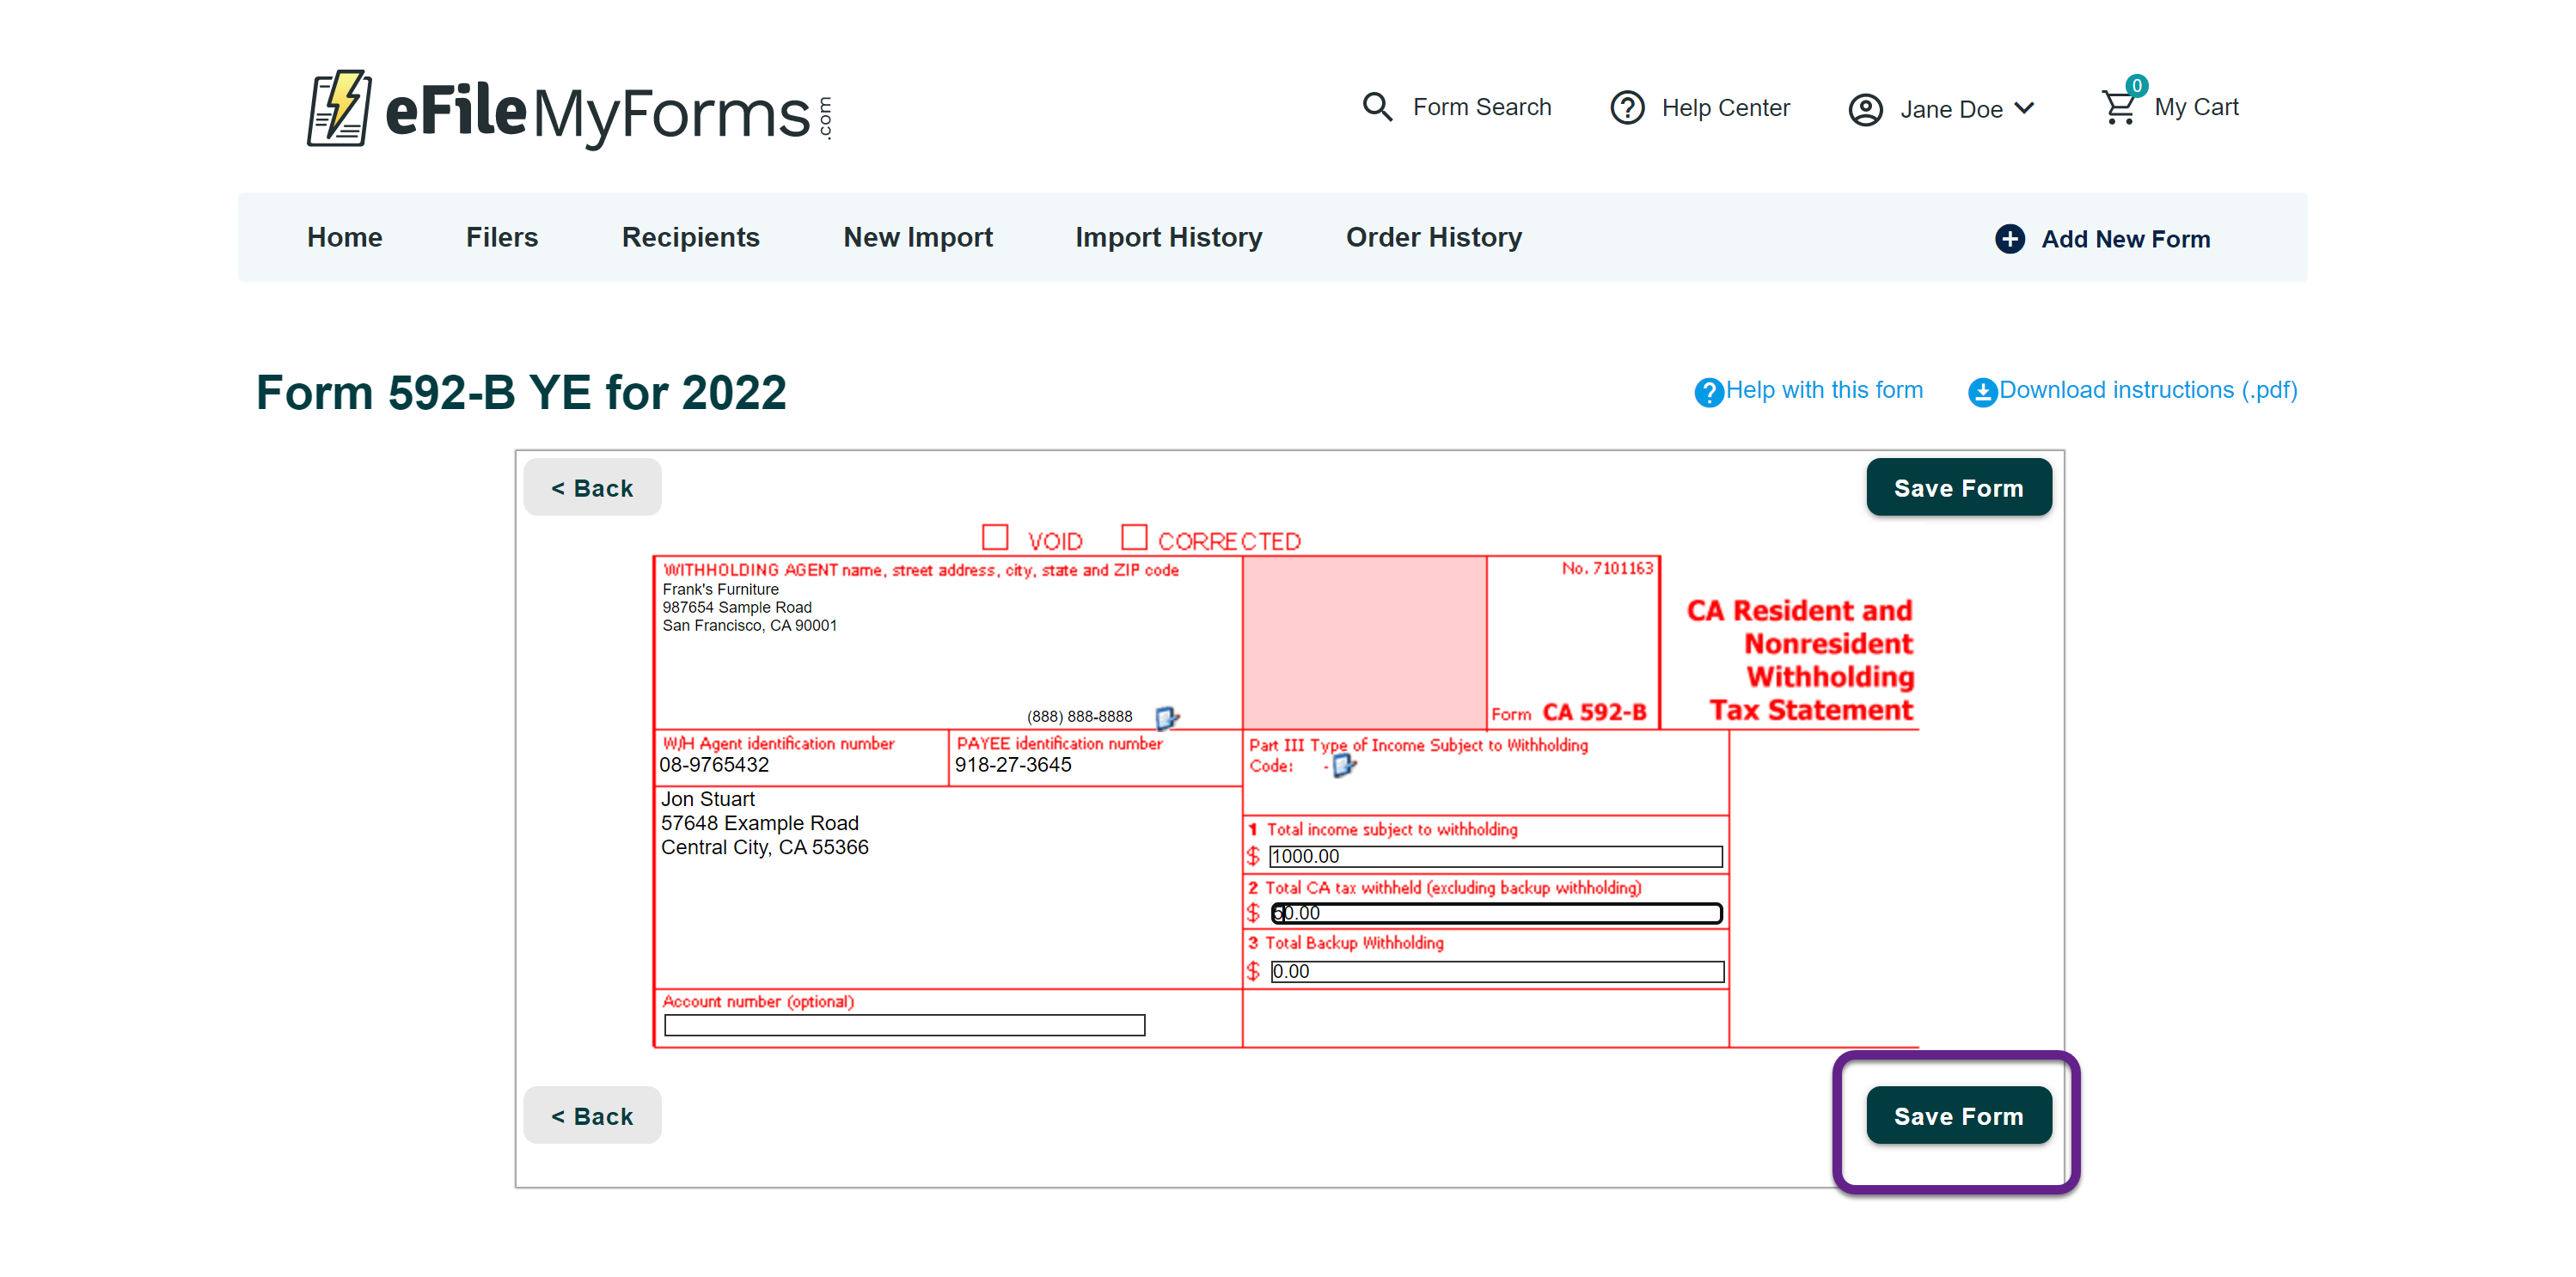 Image of an example 592-B YE form with a callout on the Save Form button.